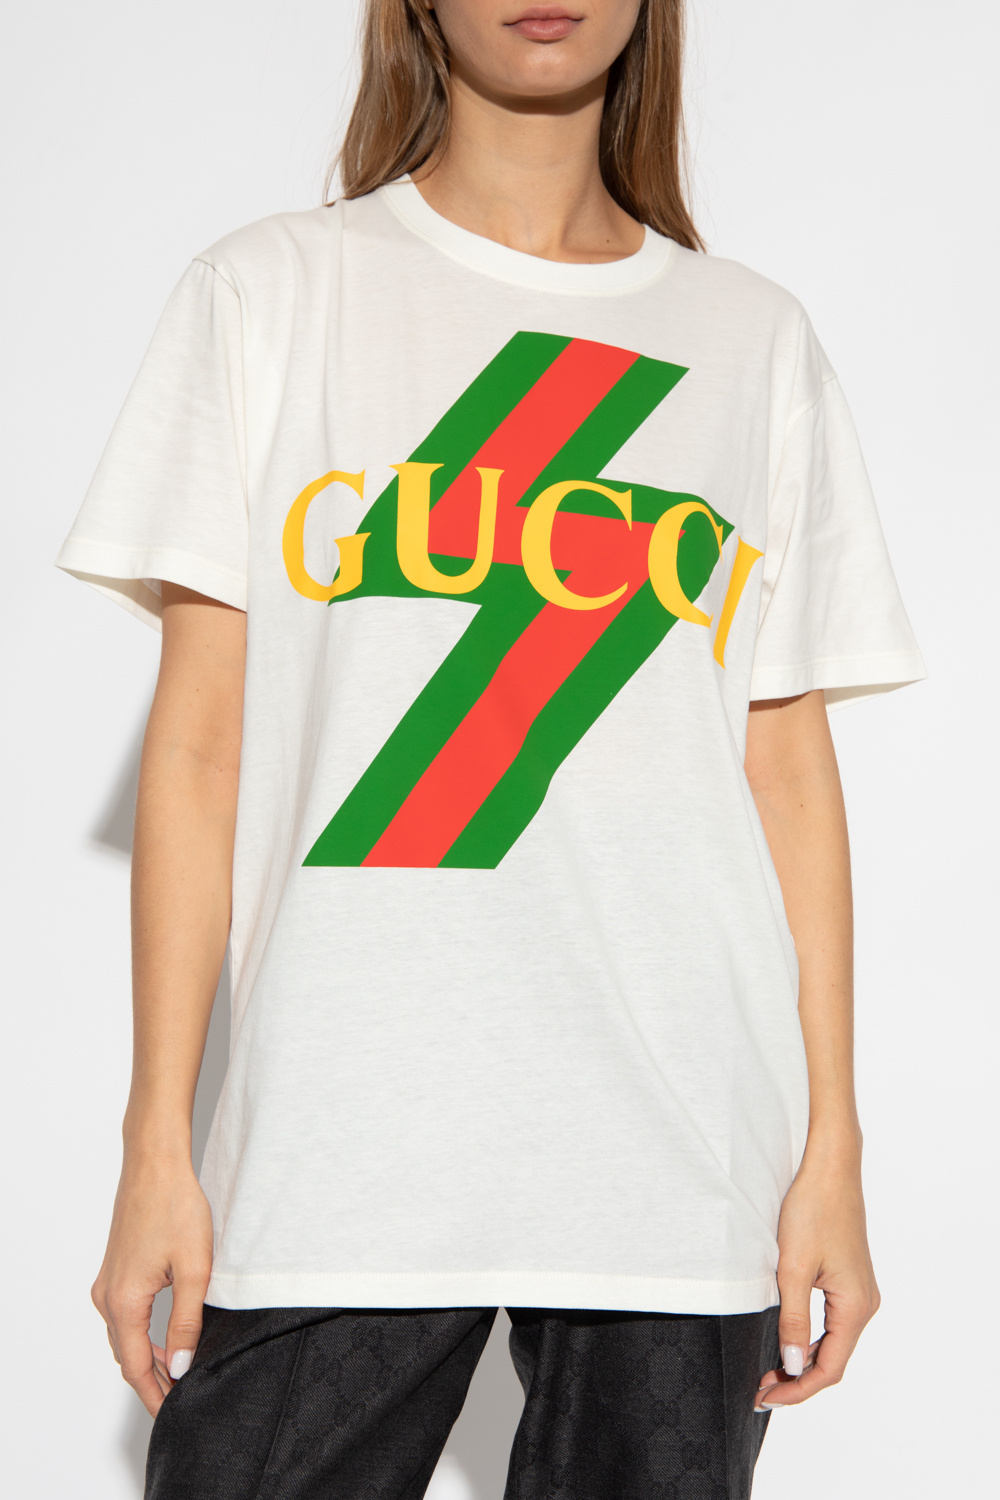 gucci scoop neck top item | T-shirt with logo Gucci 